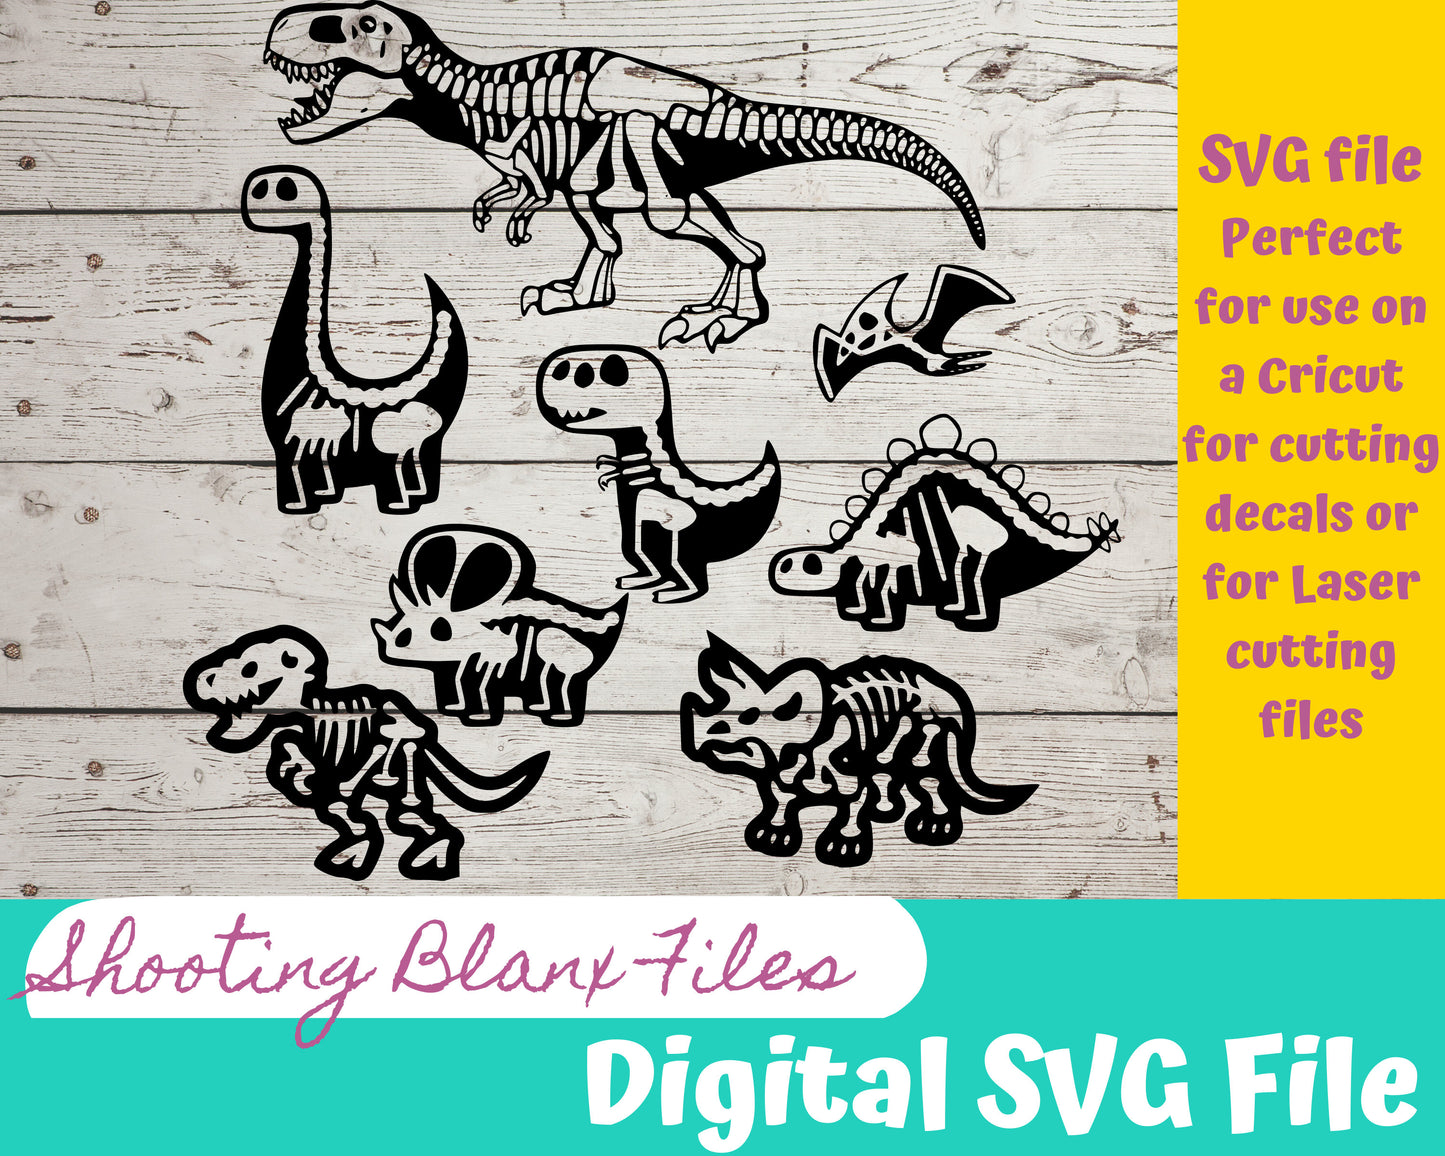 Dinosaur Skeleton SVG Bundle file perfect for Cricut, Cameo, or Silhouette also for laser engraving Glowforge, Scary, Halloween, Dino, Trex